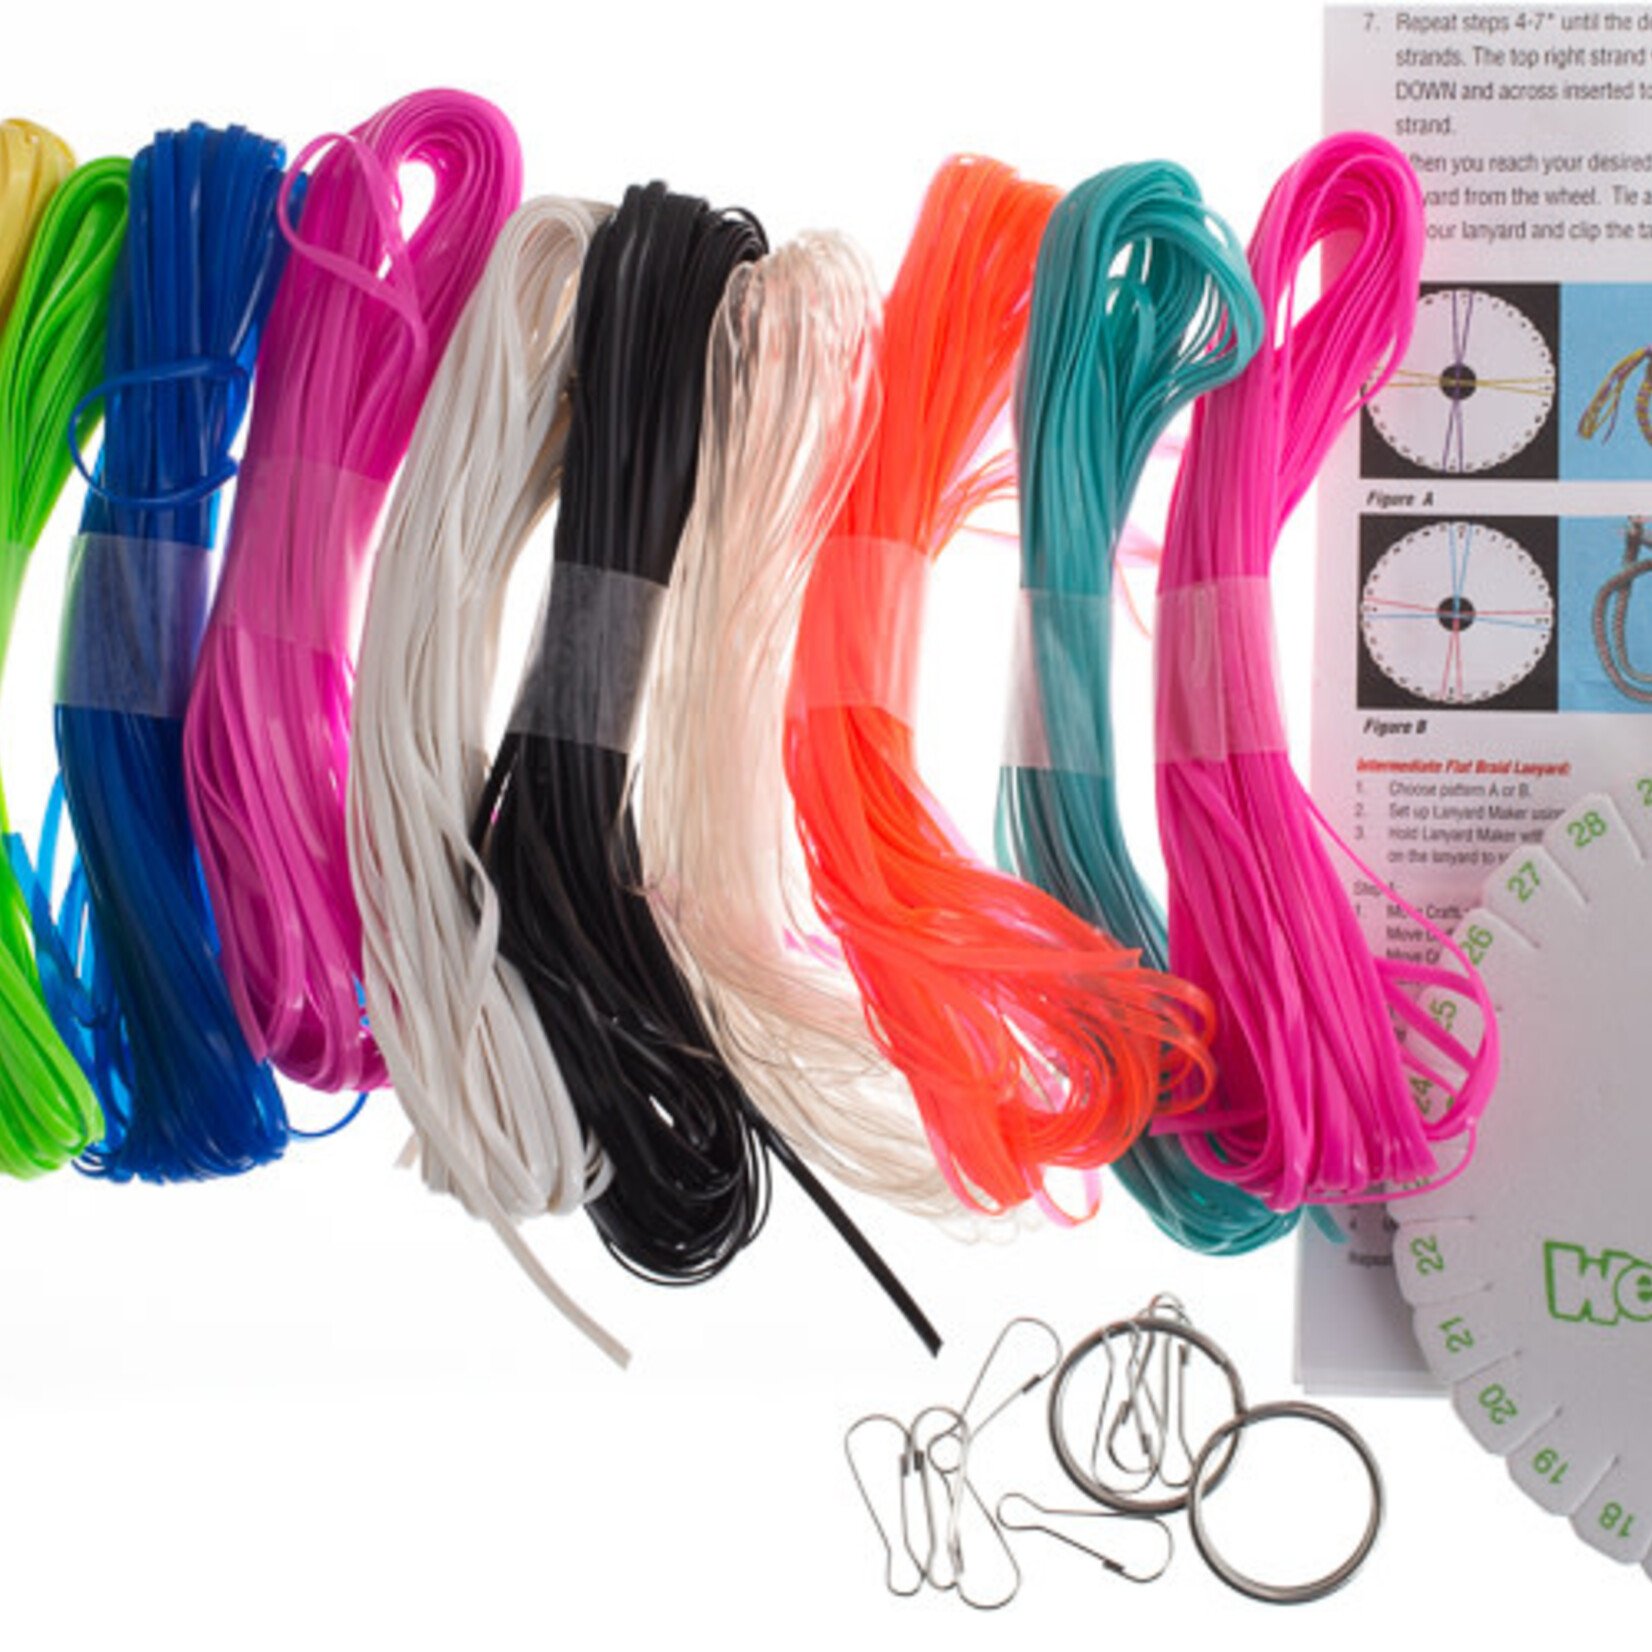 Craft Lace Mega Pack 14 Colors W/Kumihimo Disc Neon Colors